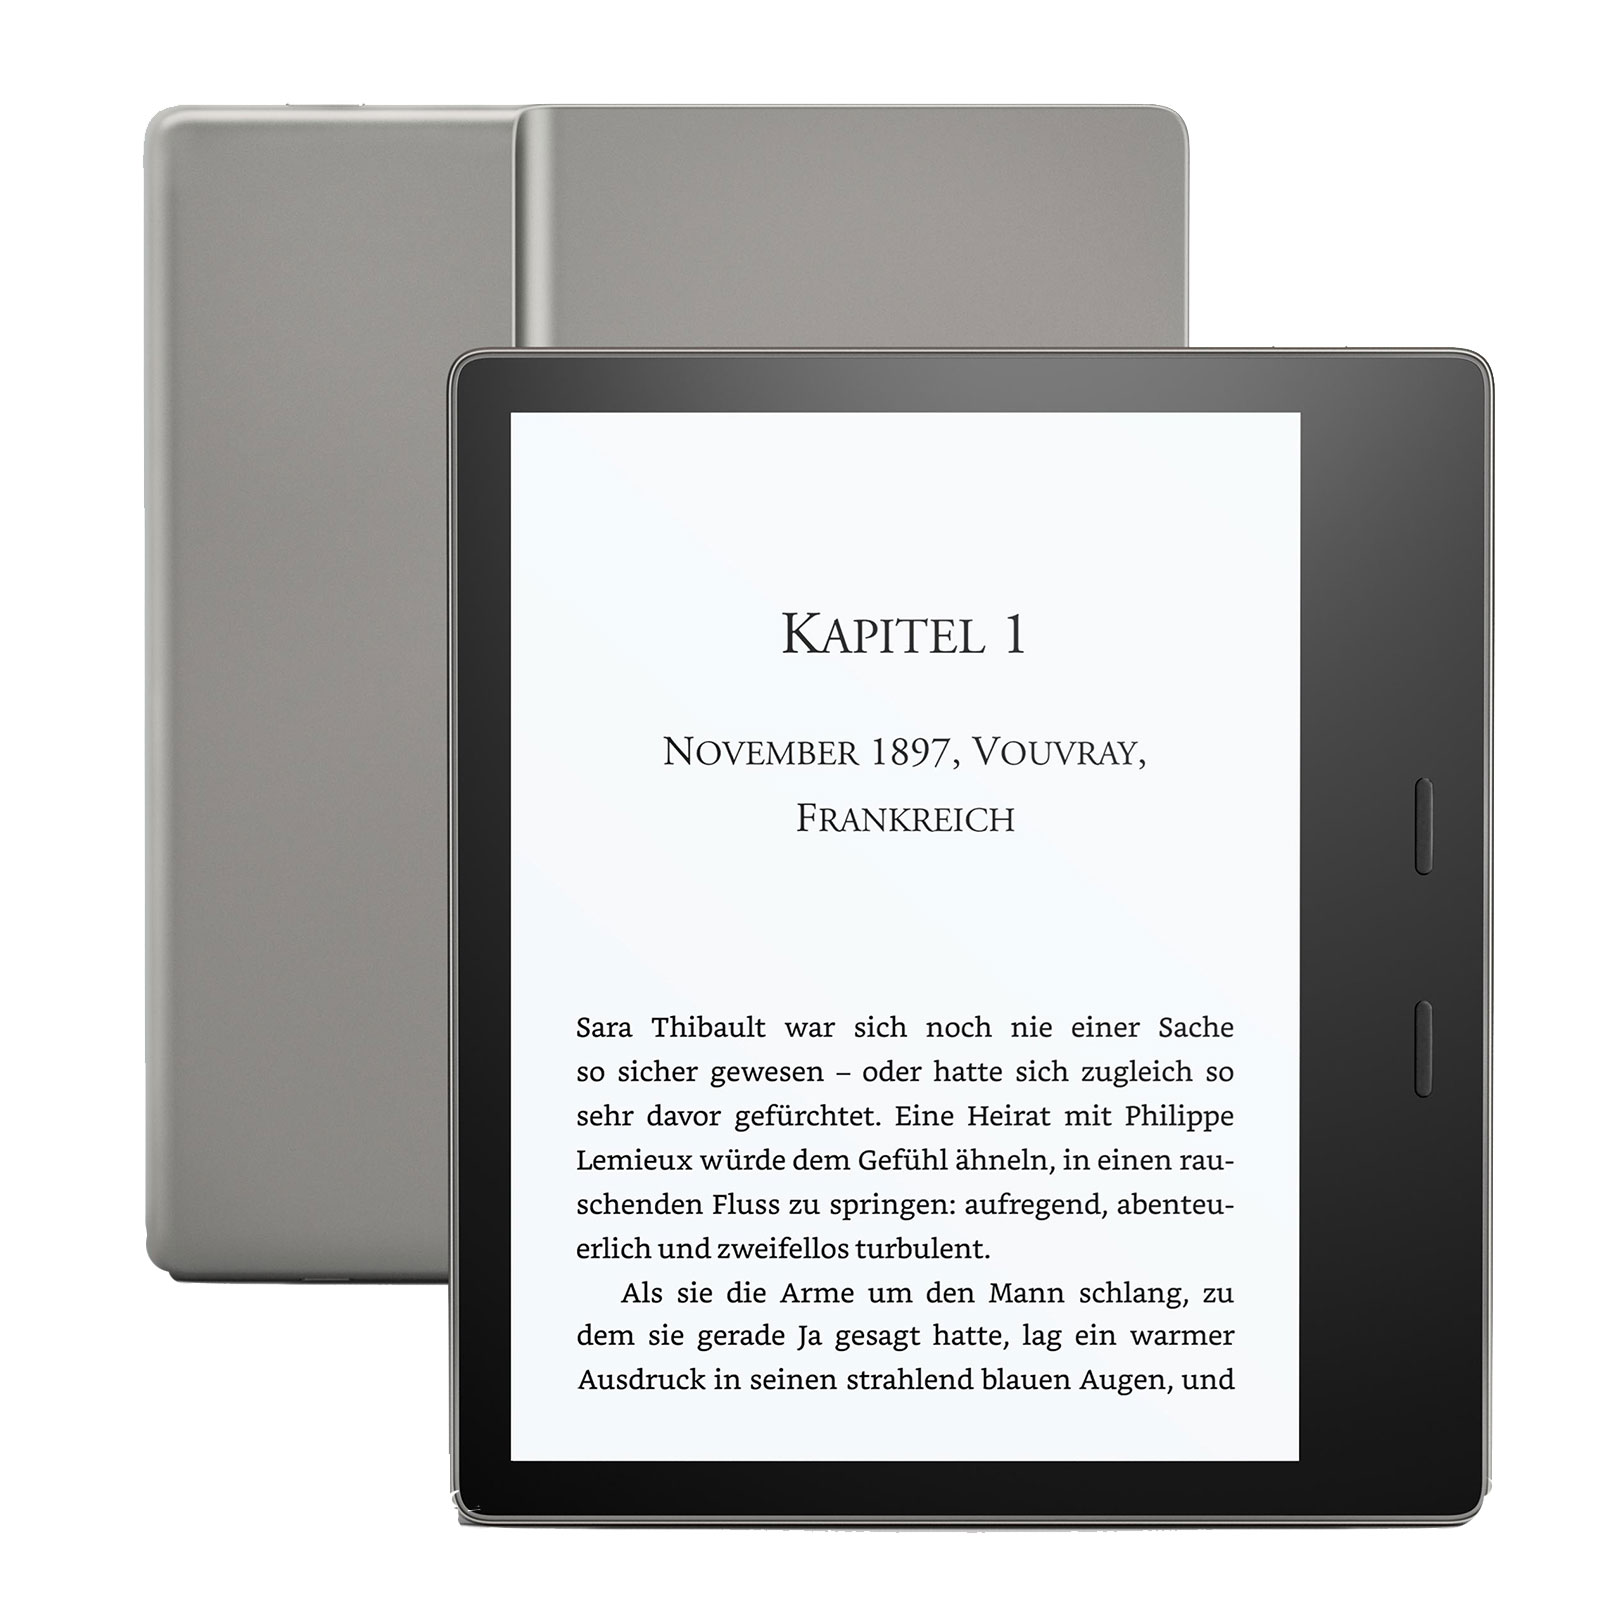 Amazon all new Kindle Oasis wifi 8GB Graphite 7" (300ppi) B07L5GDTYY inkl. Spezialangebote (Werbung)